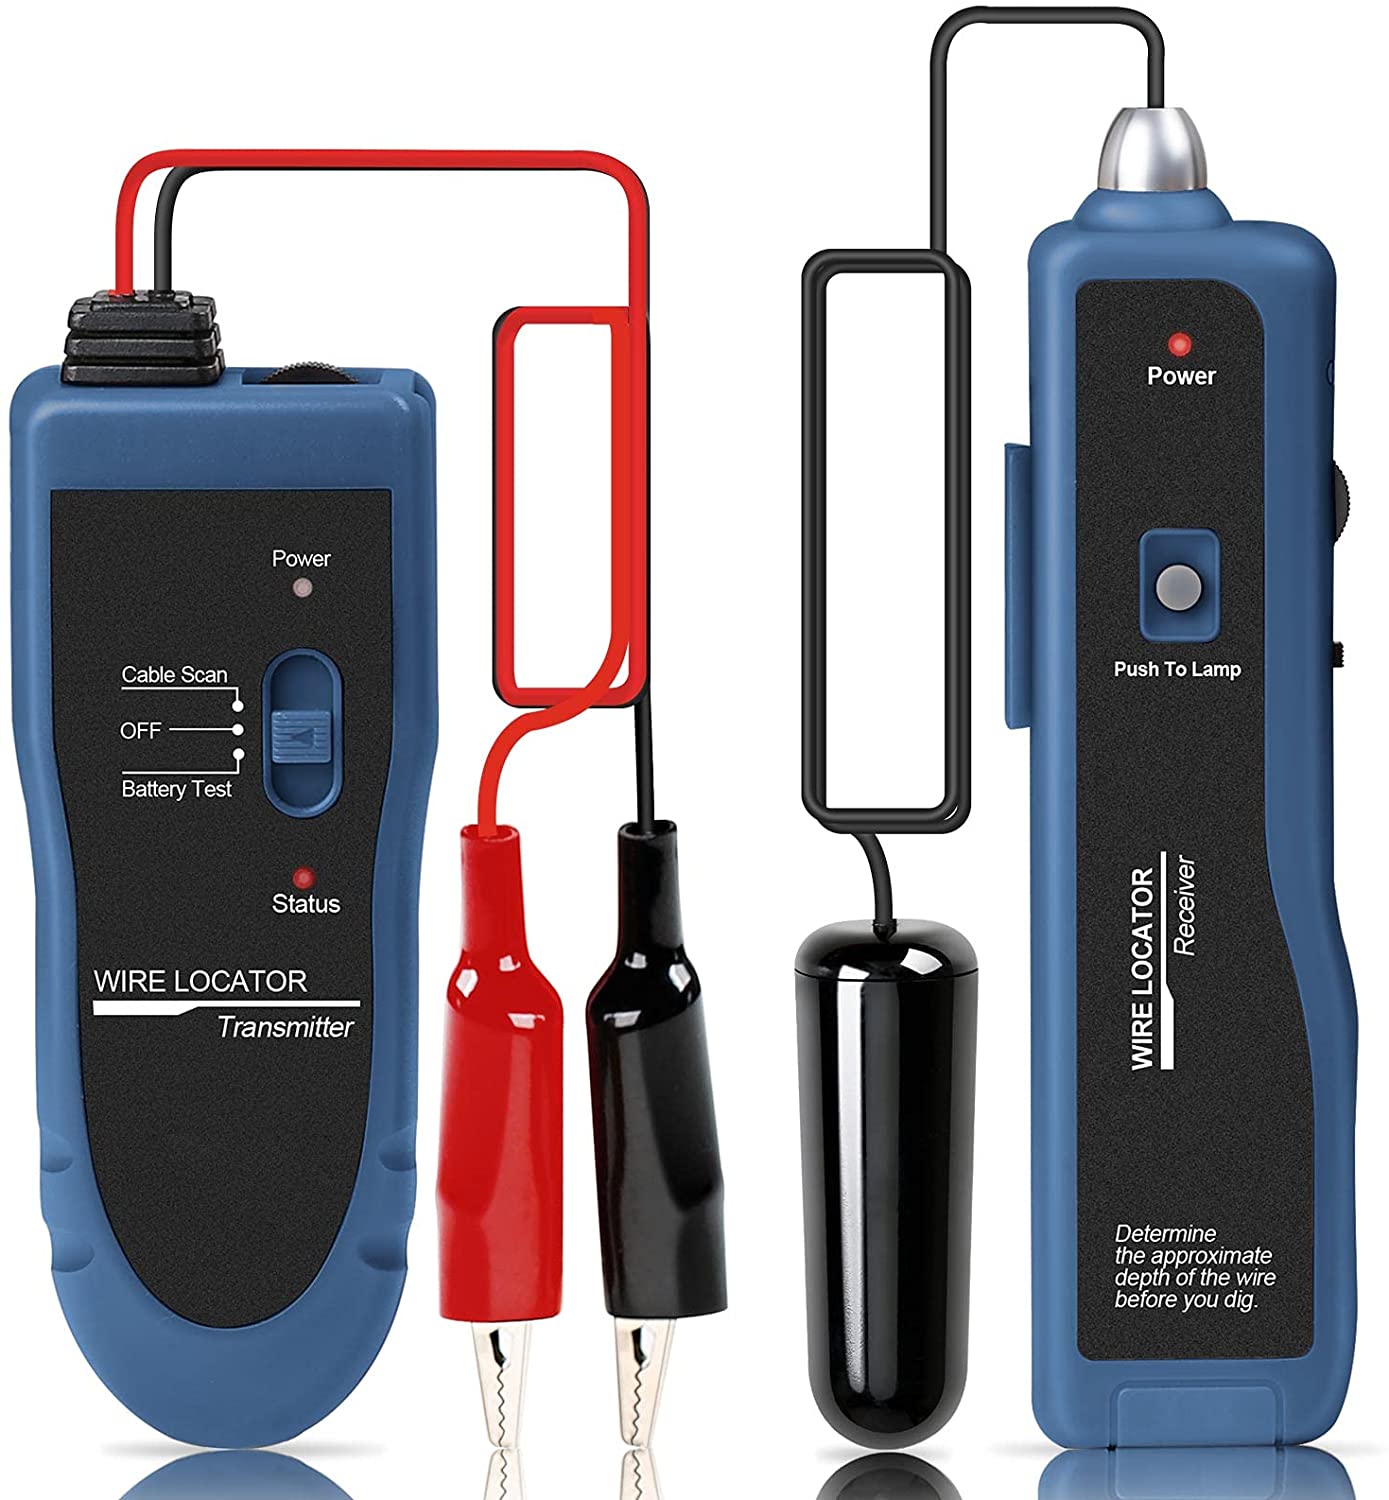 VR1 “Wirehound®” – Cable Detector